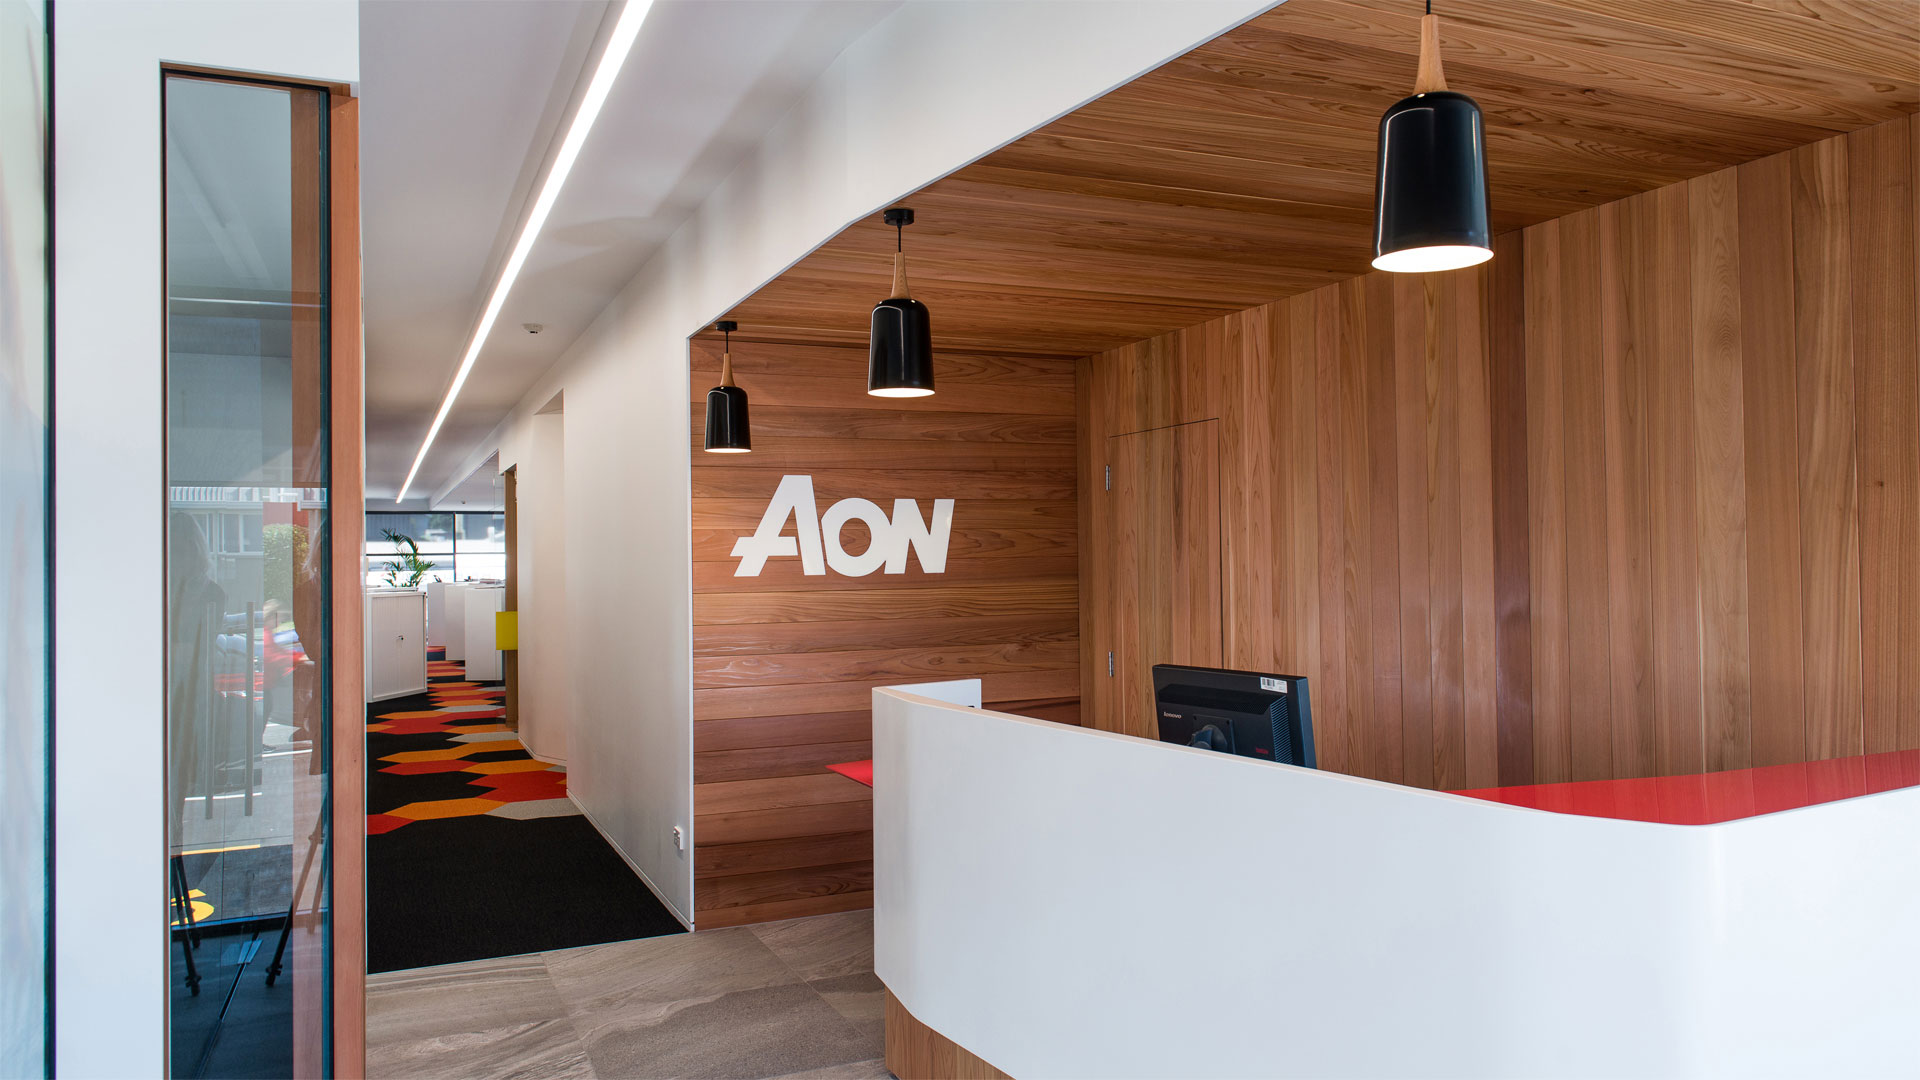 Aon New Plymouth designed by Matz Architects